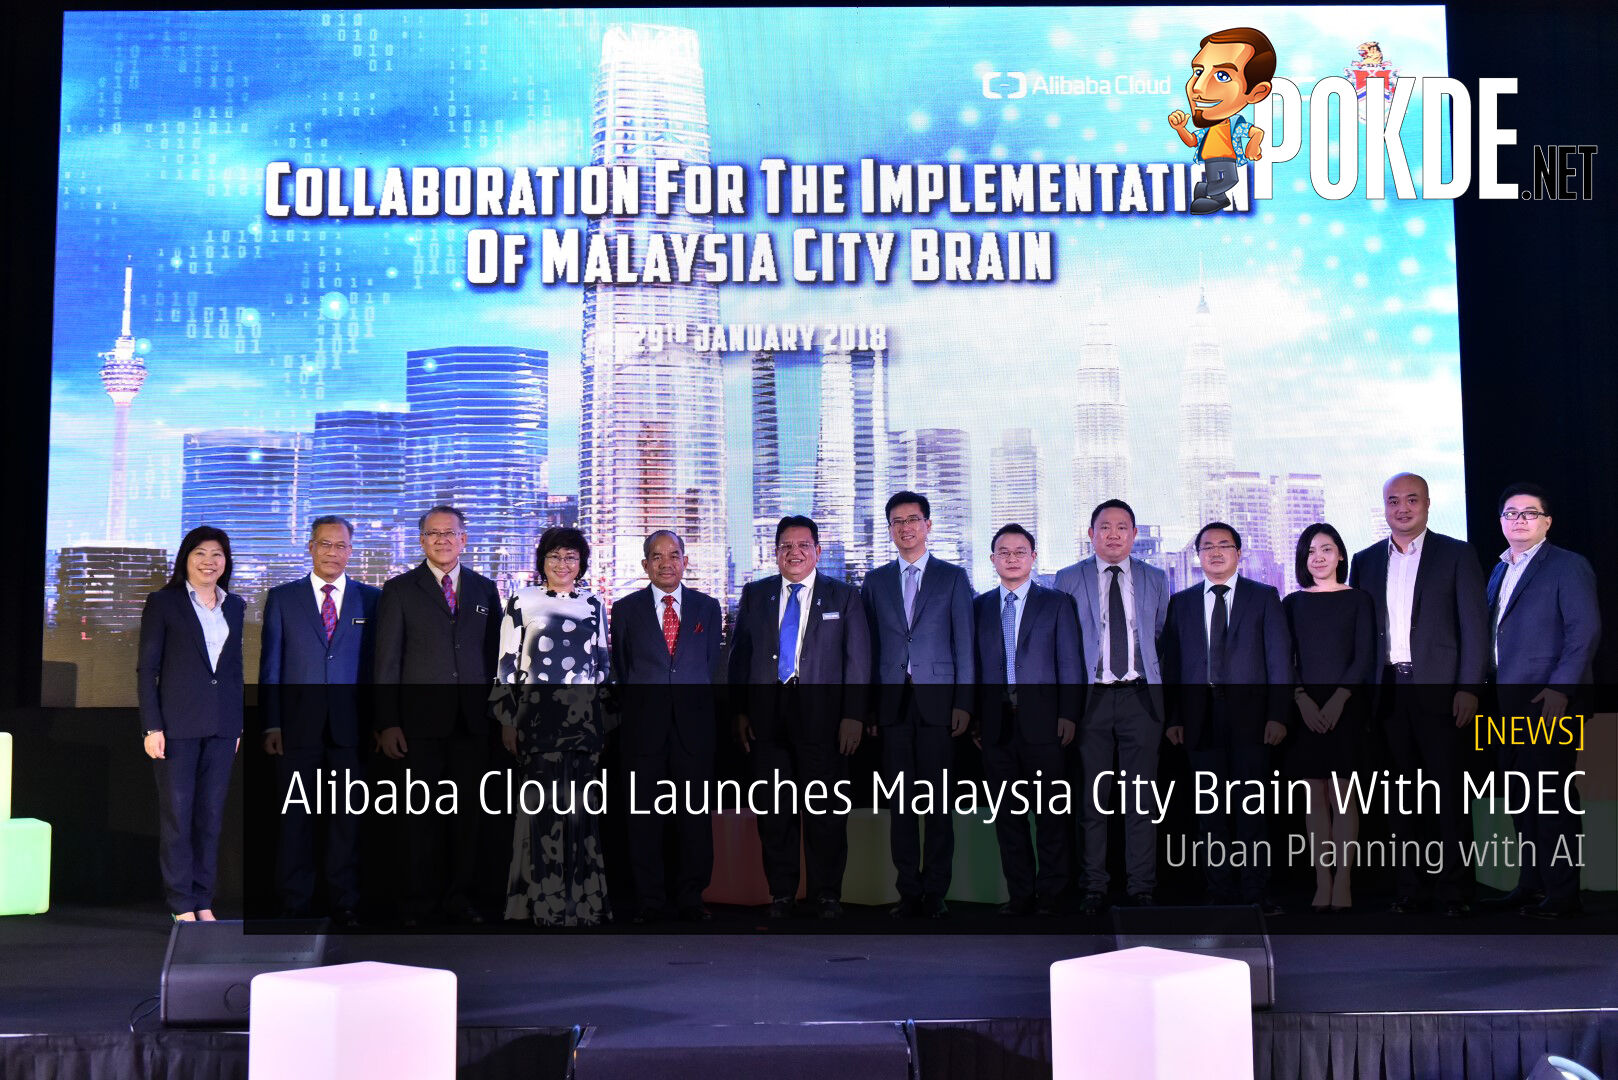 Alibaba Cloud Launches Malaysia City Brain With MDEC - Urban Planning with AI 22